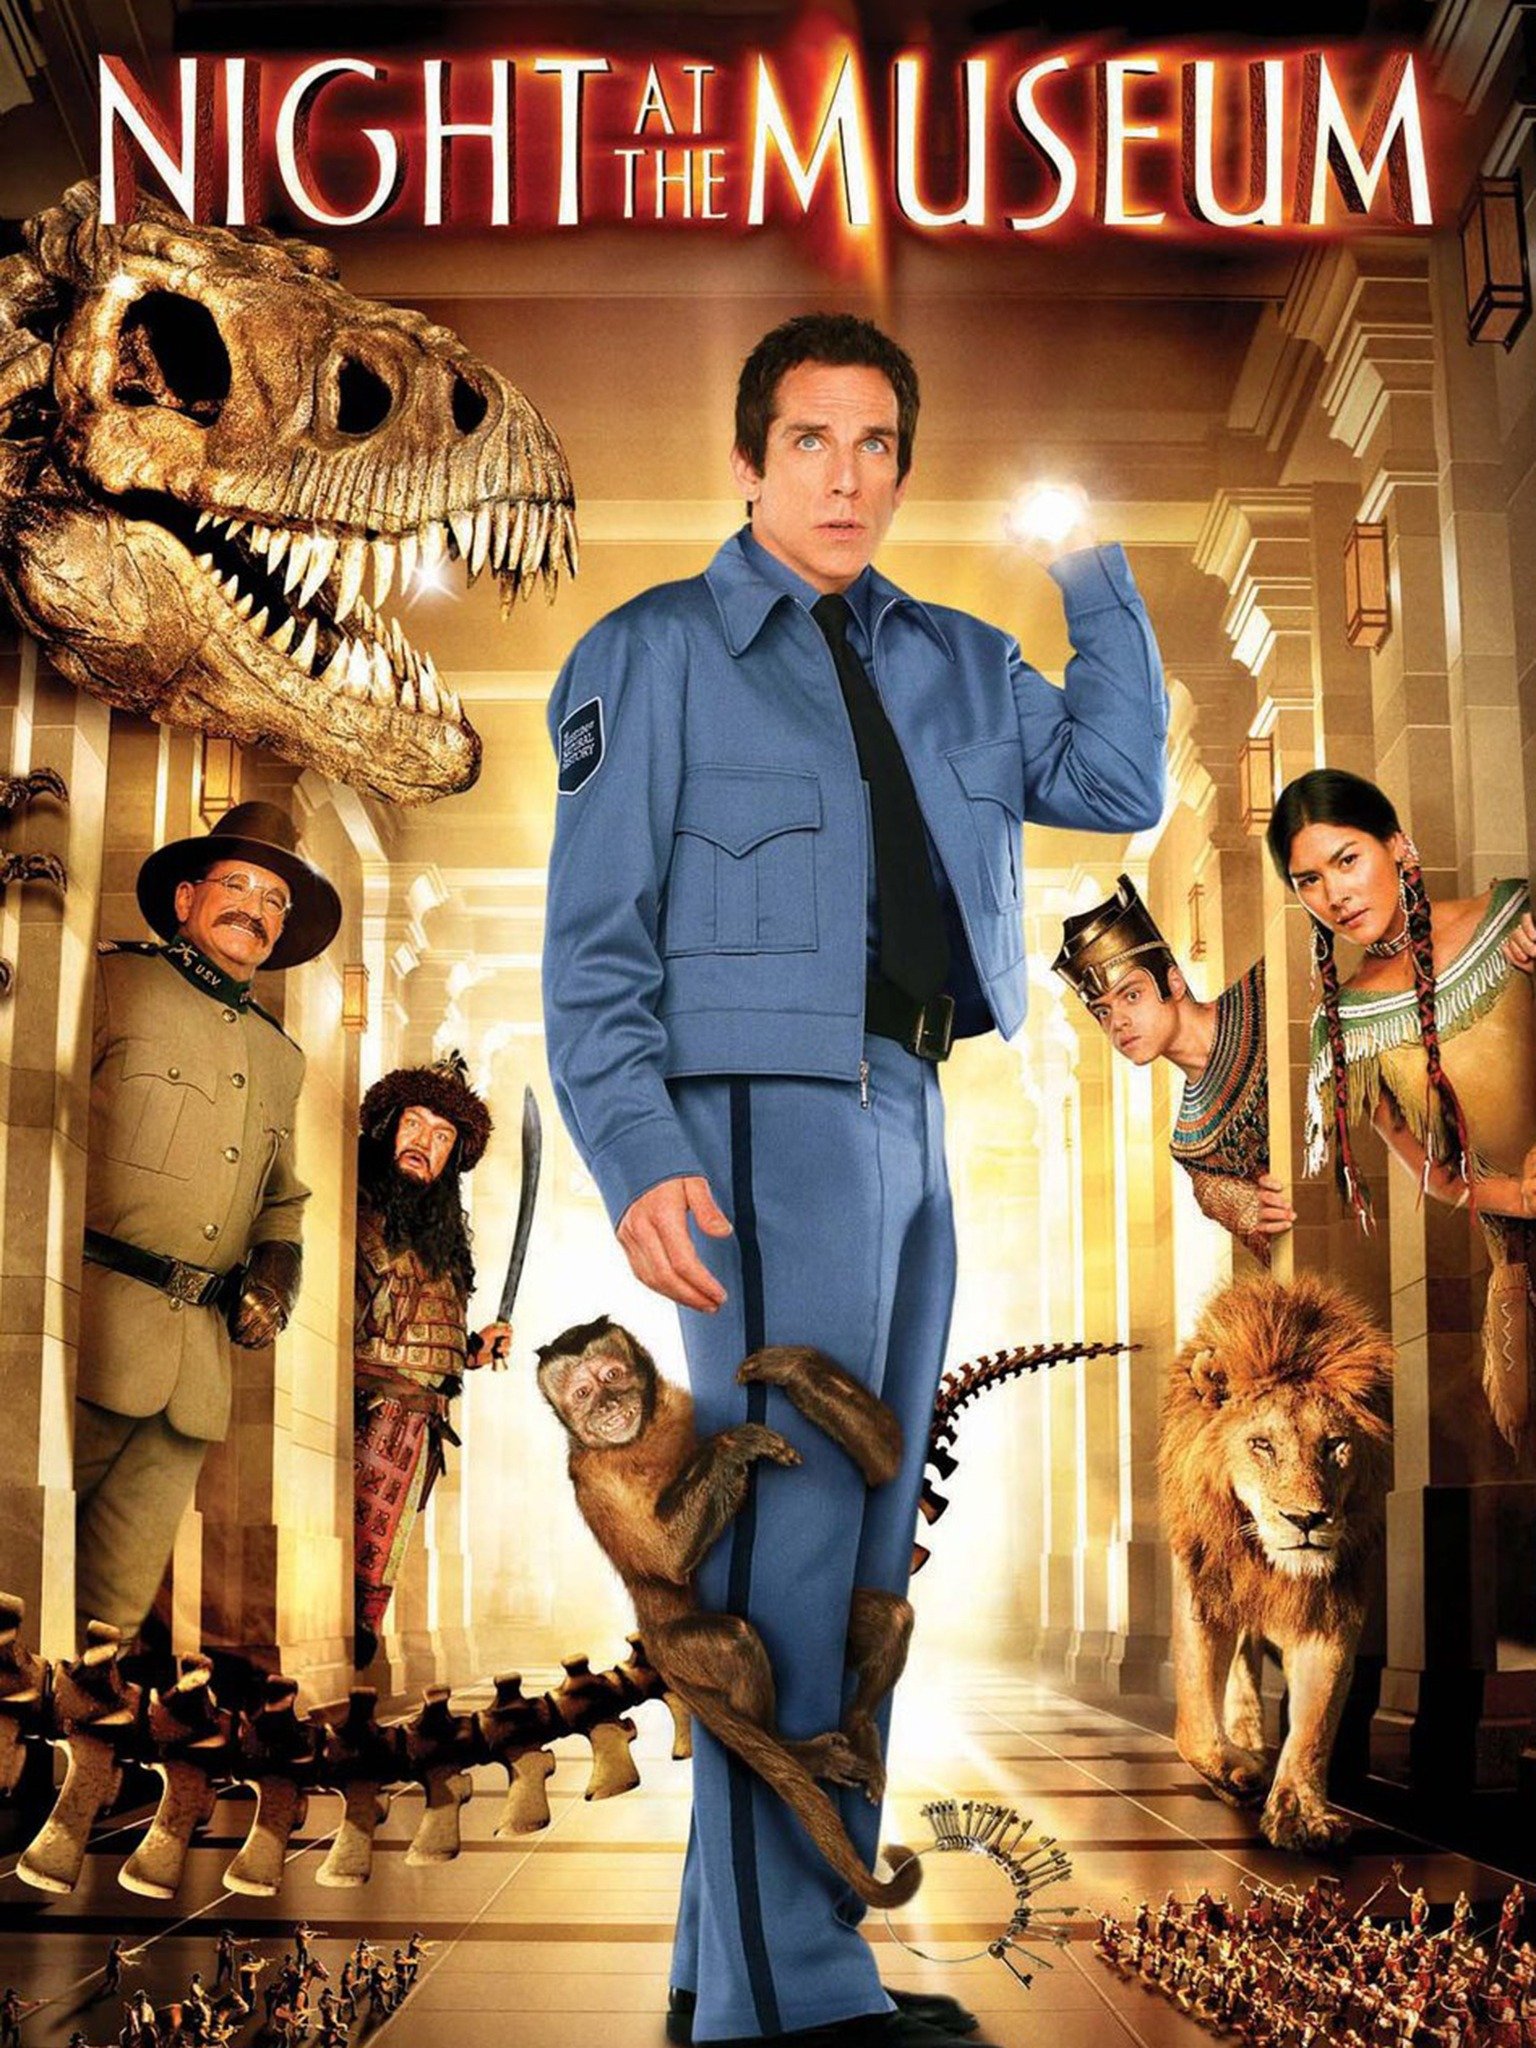 Night at the Museum Trailer 1 Trailers & Videos Rotten Tomatoes